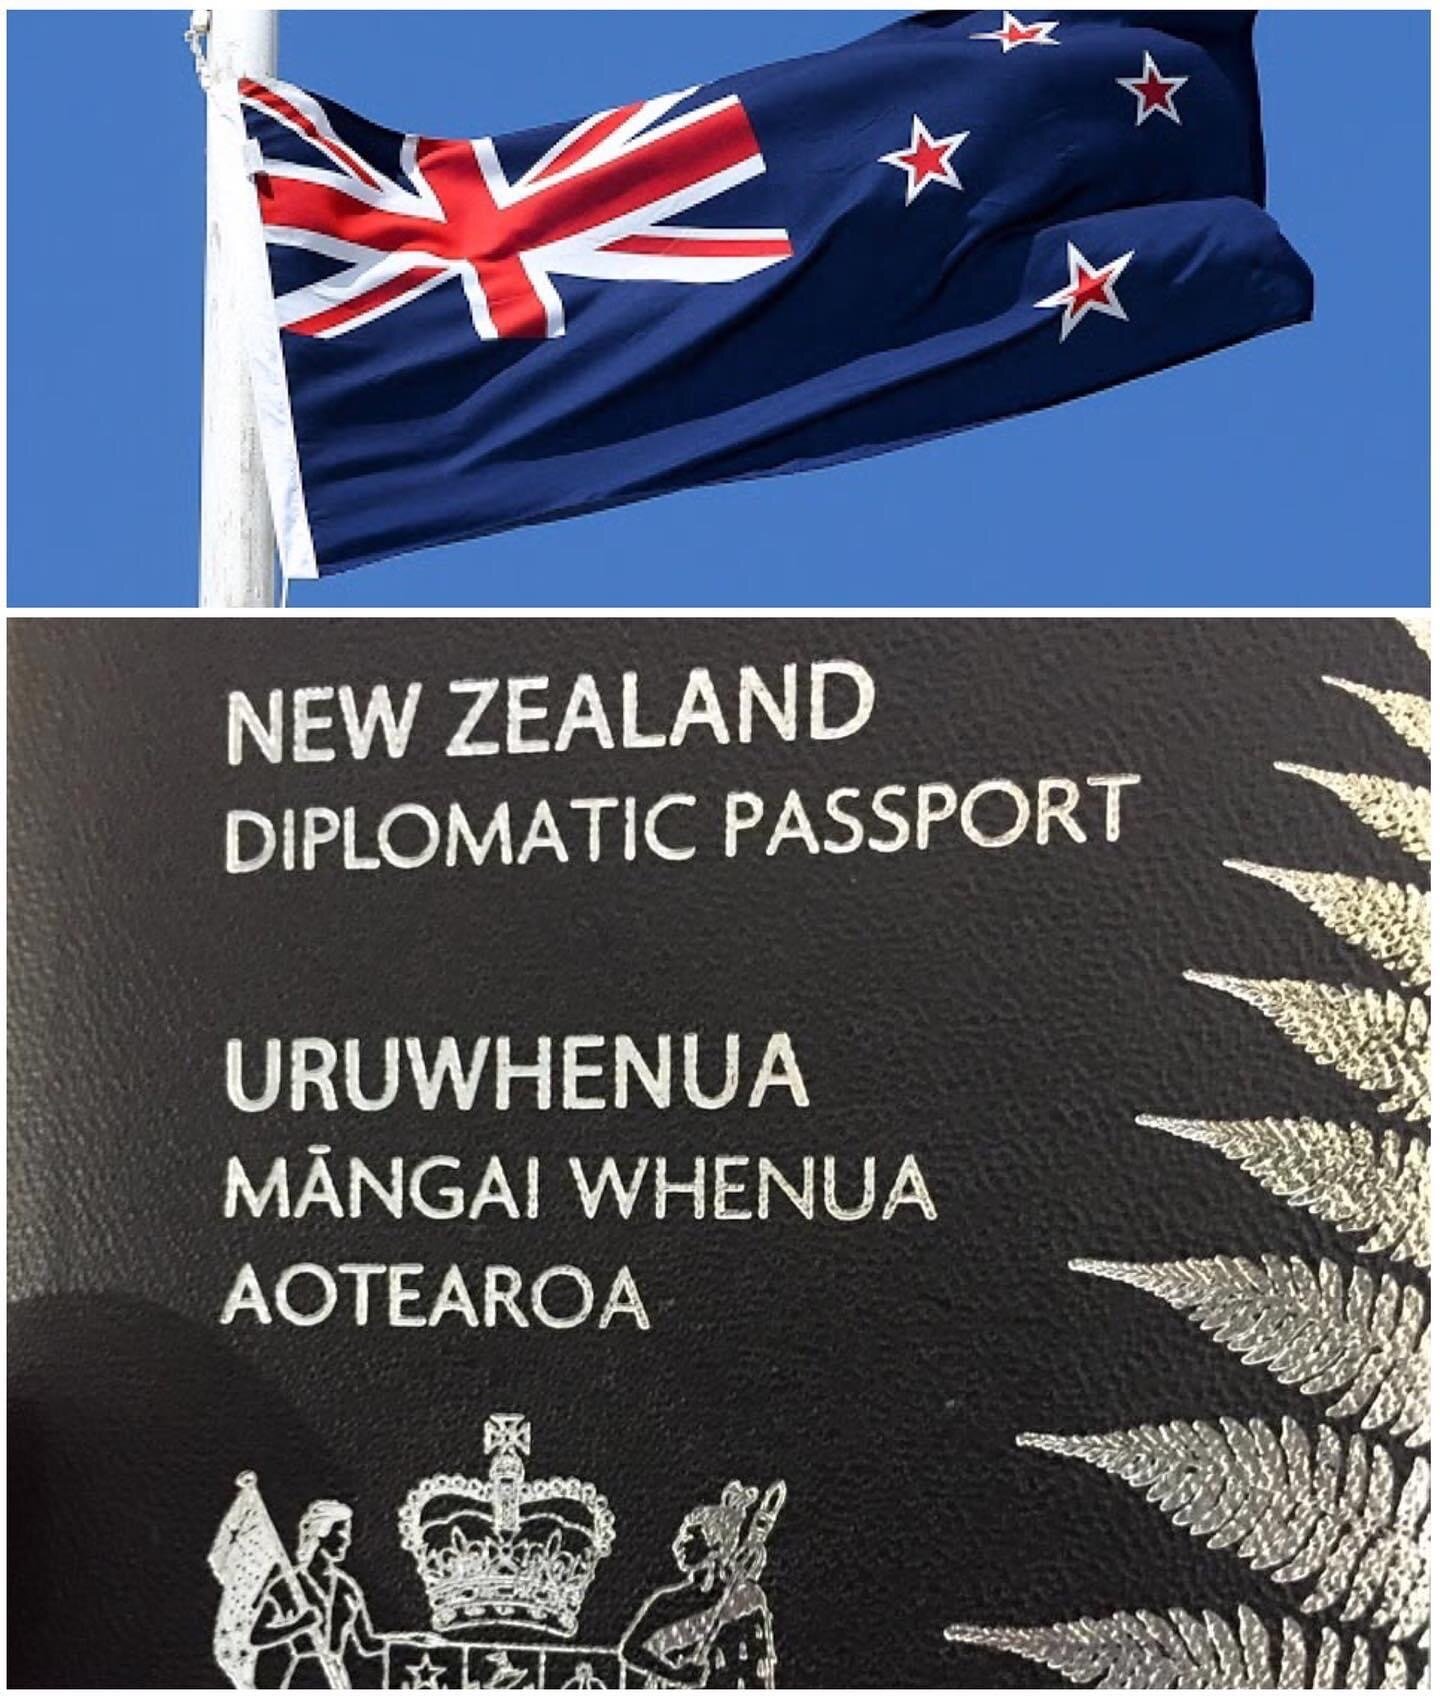 Tom Barker: The New Zealand Flag, and a photo of the biggest perk of his job: a diplomatic passport.